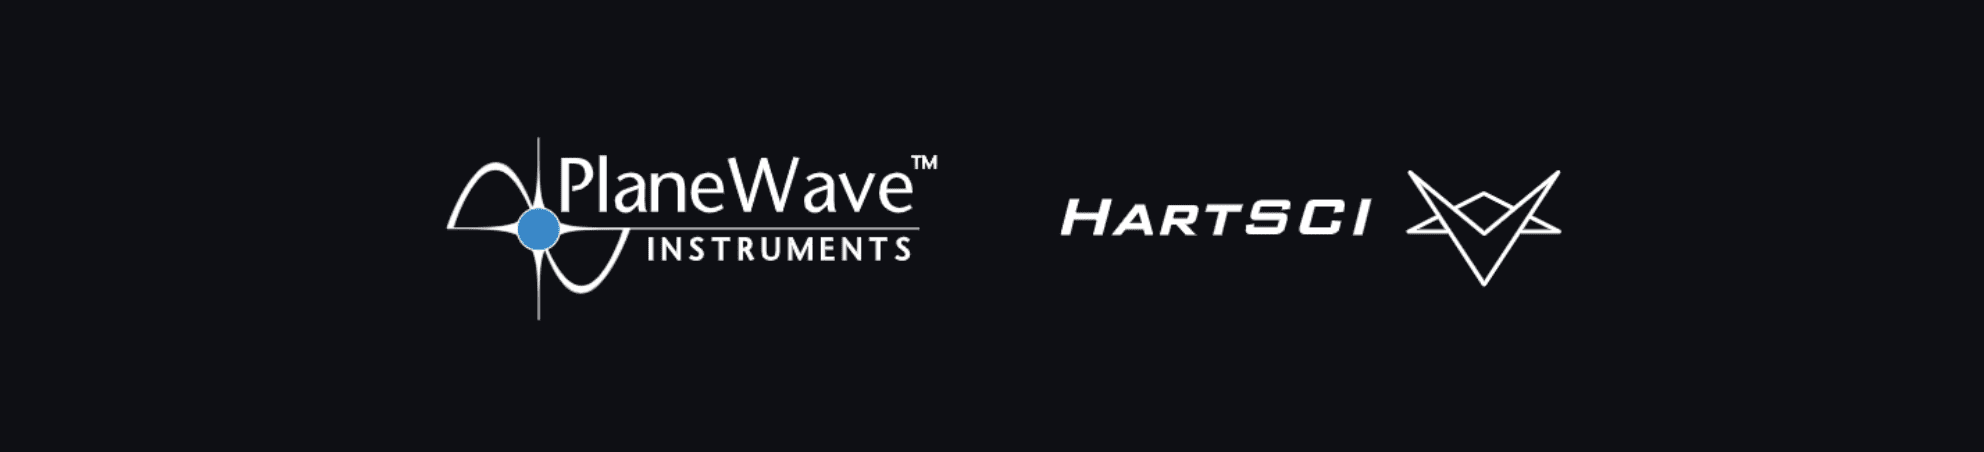 PlaneWave Instruments and HartSCI Logos